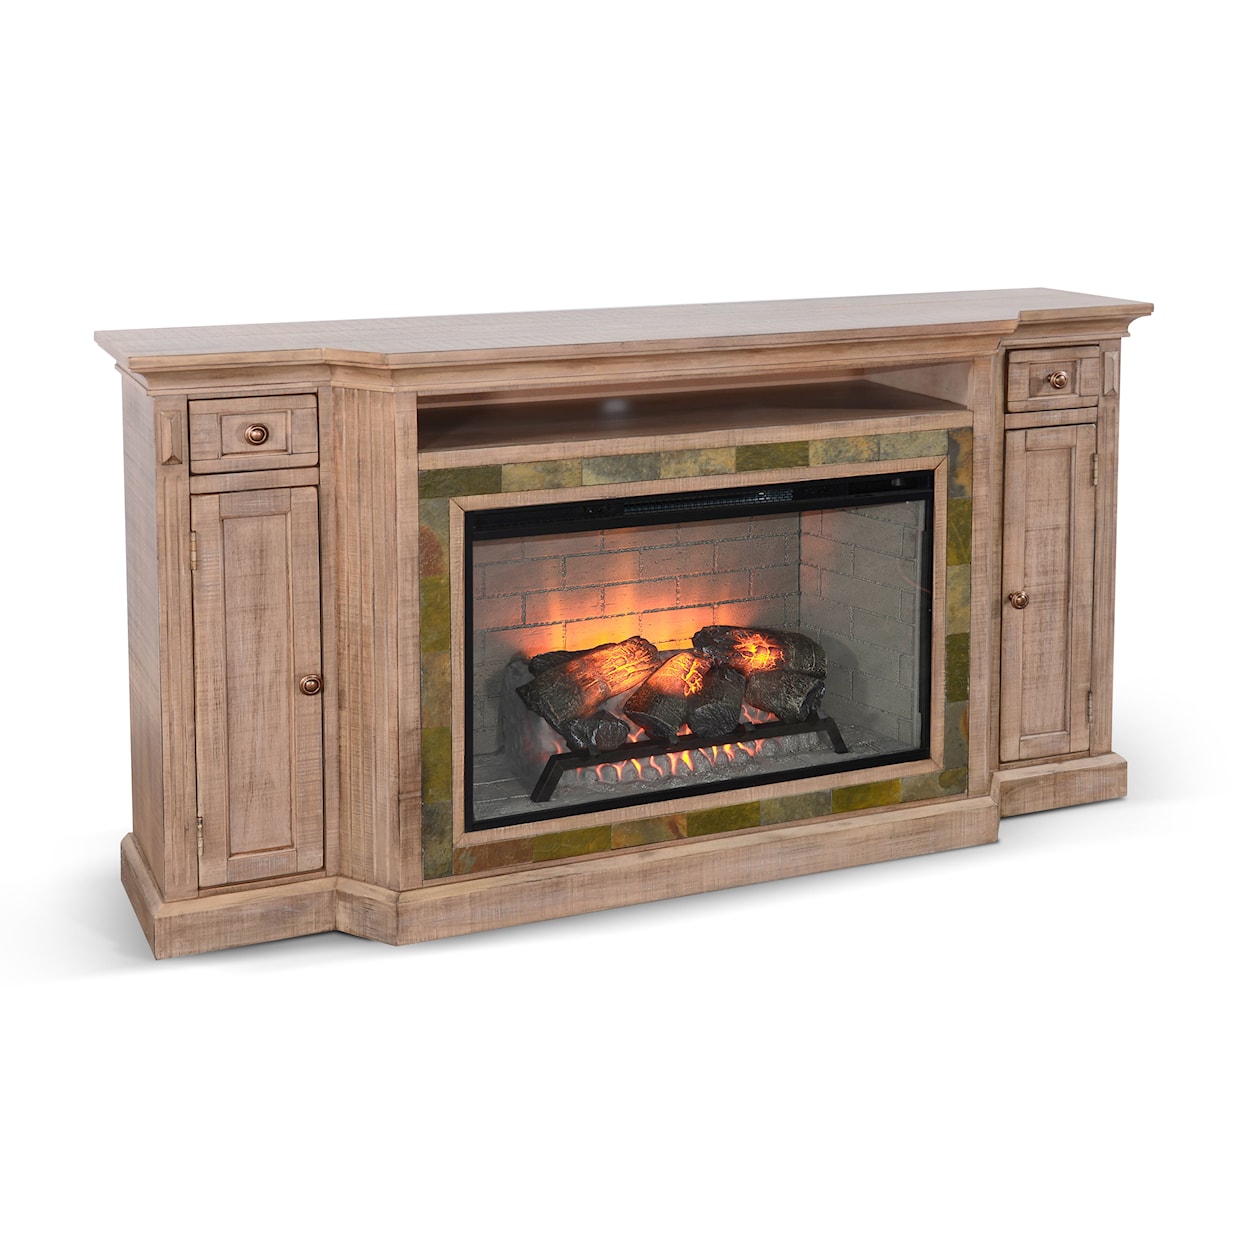 Sunny Designs Desert Rock 72" Media Console with Electric Fireplace